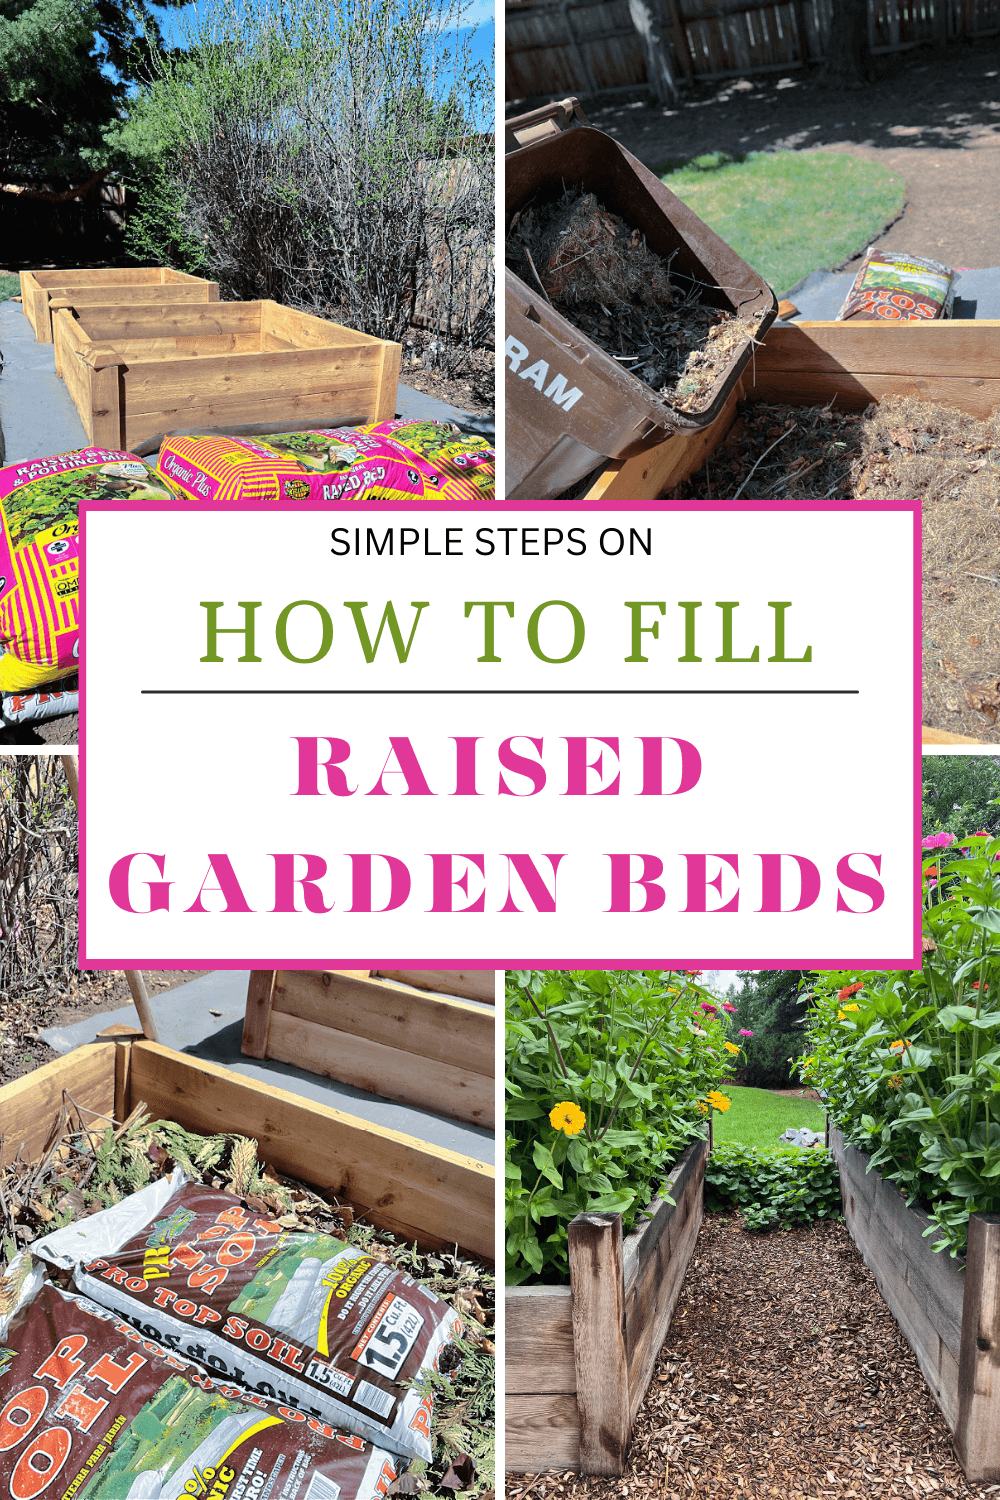 Simple steps on how to fill raised garden beds